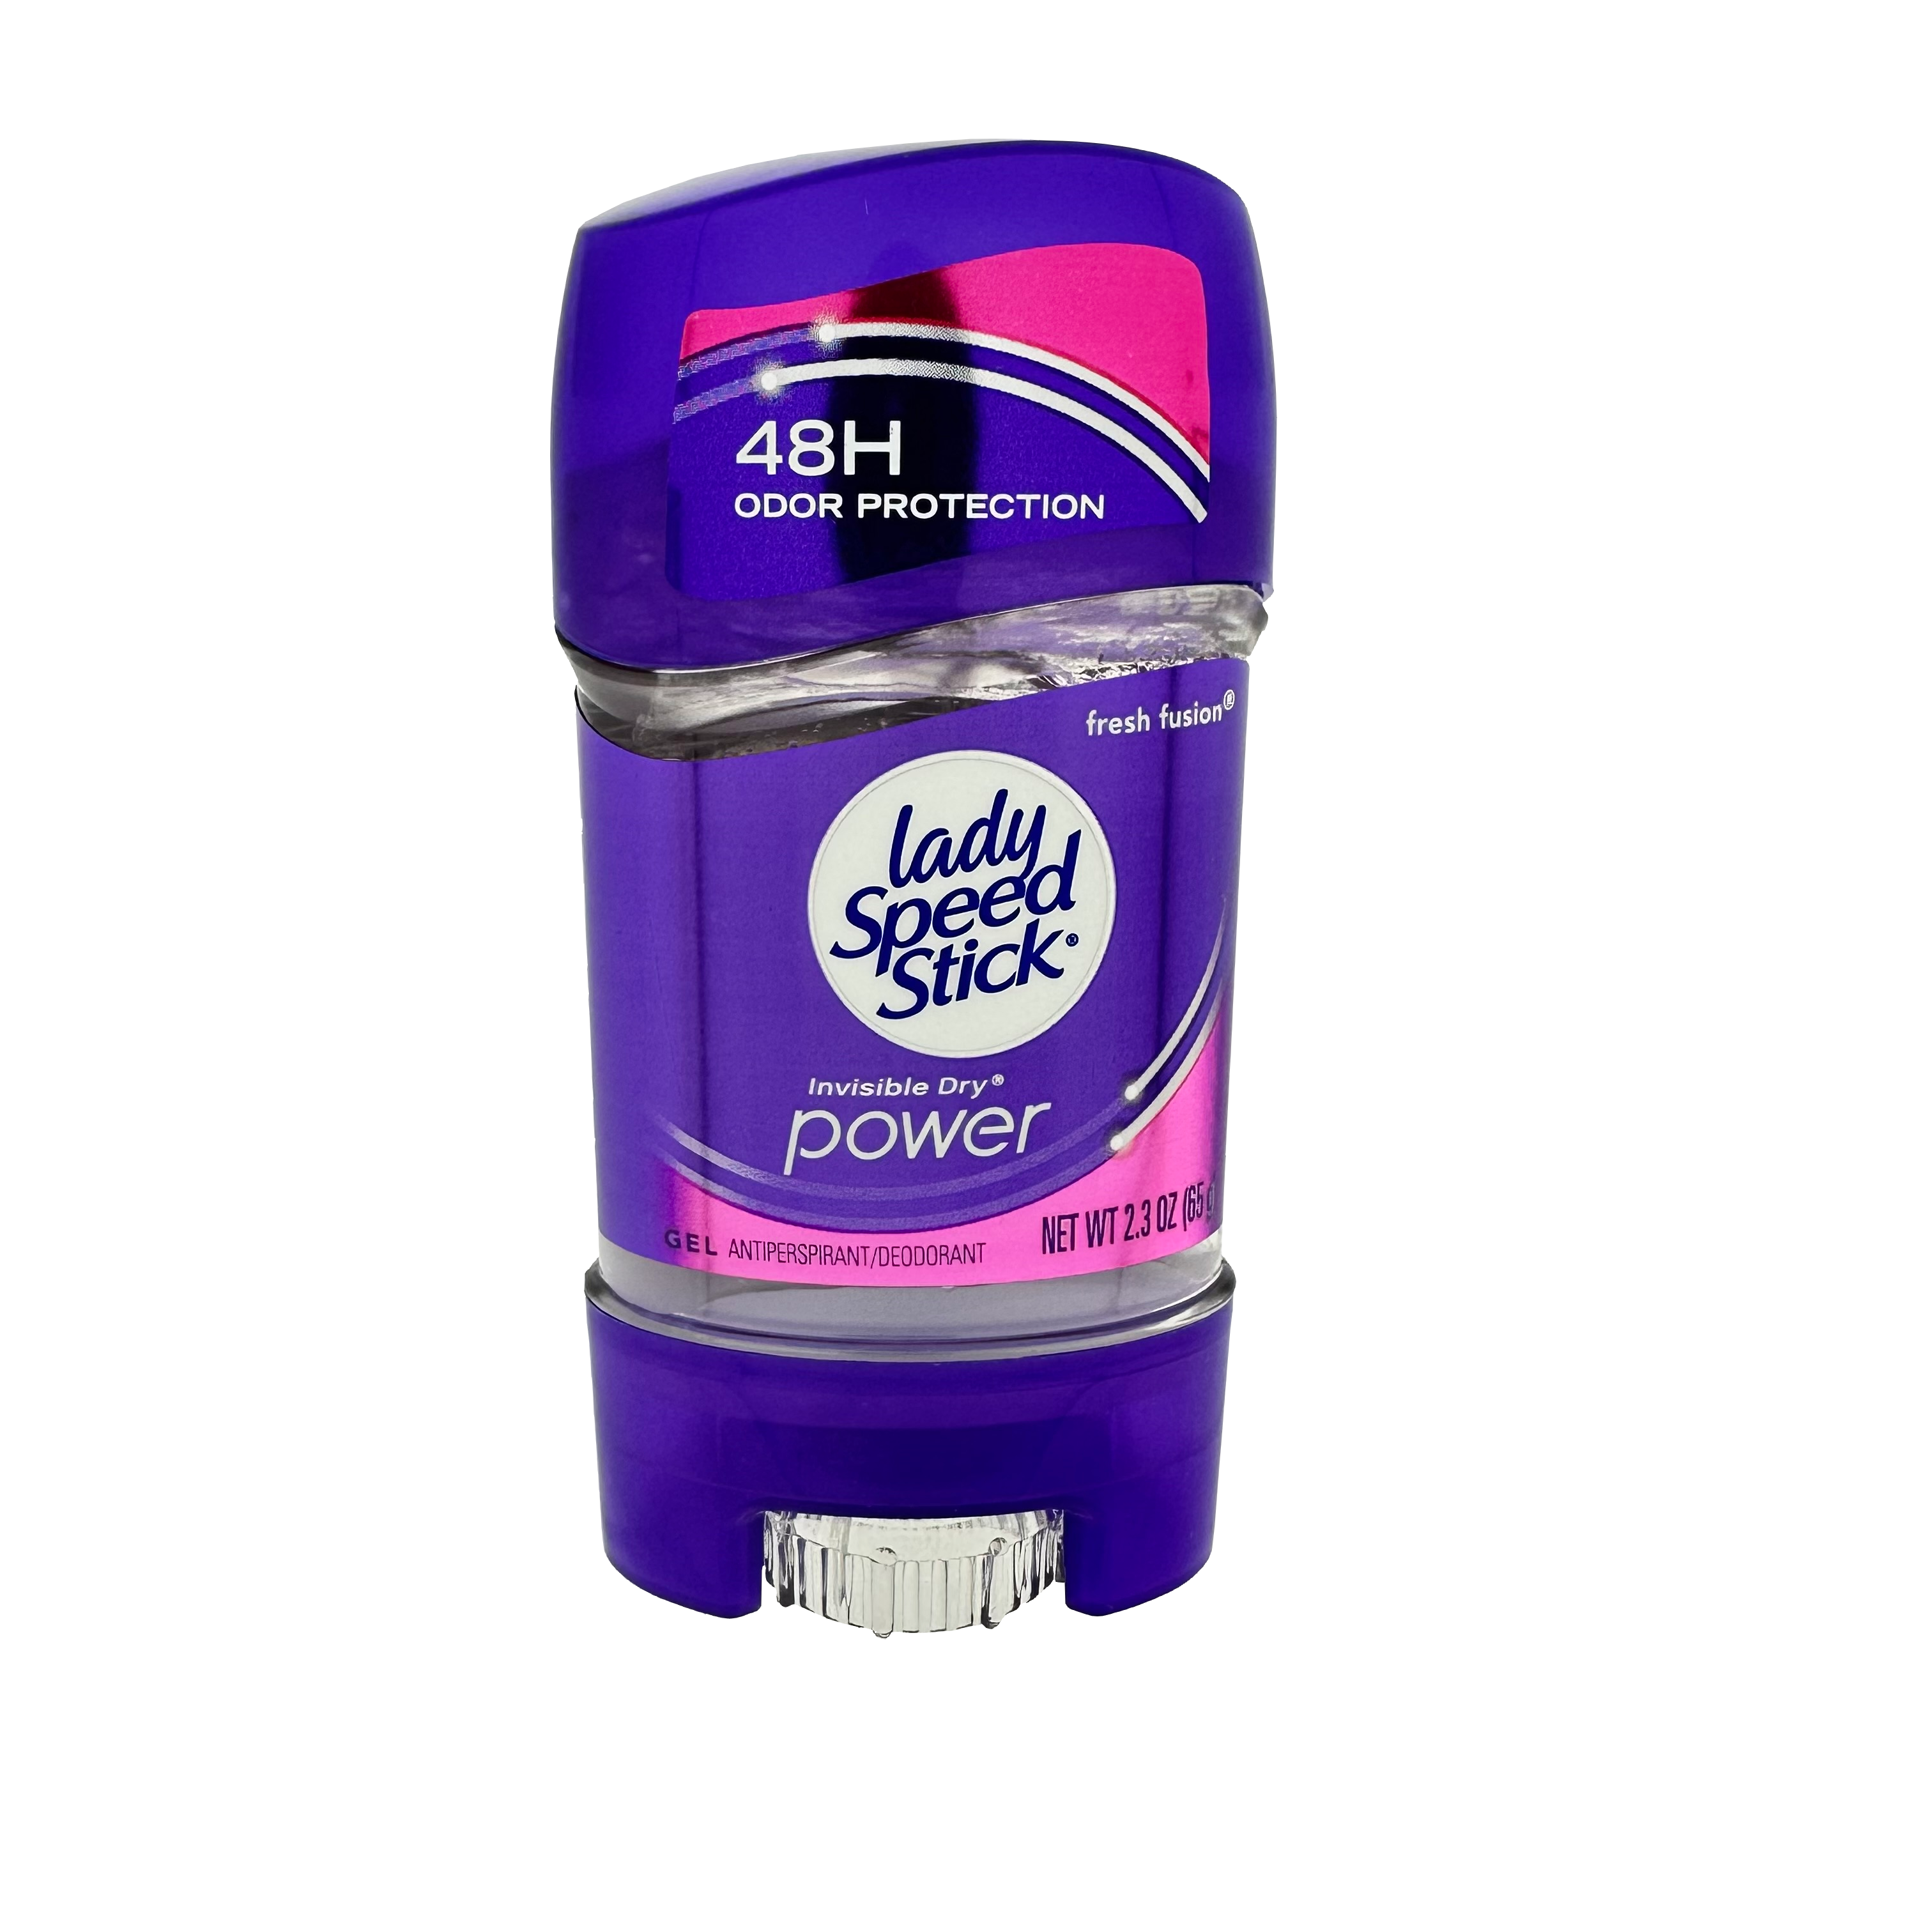 Lady Speed Stick Invisible Dry power Fresh Fusion deodorant gel stick 65g